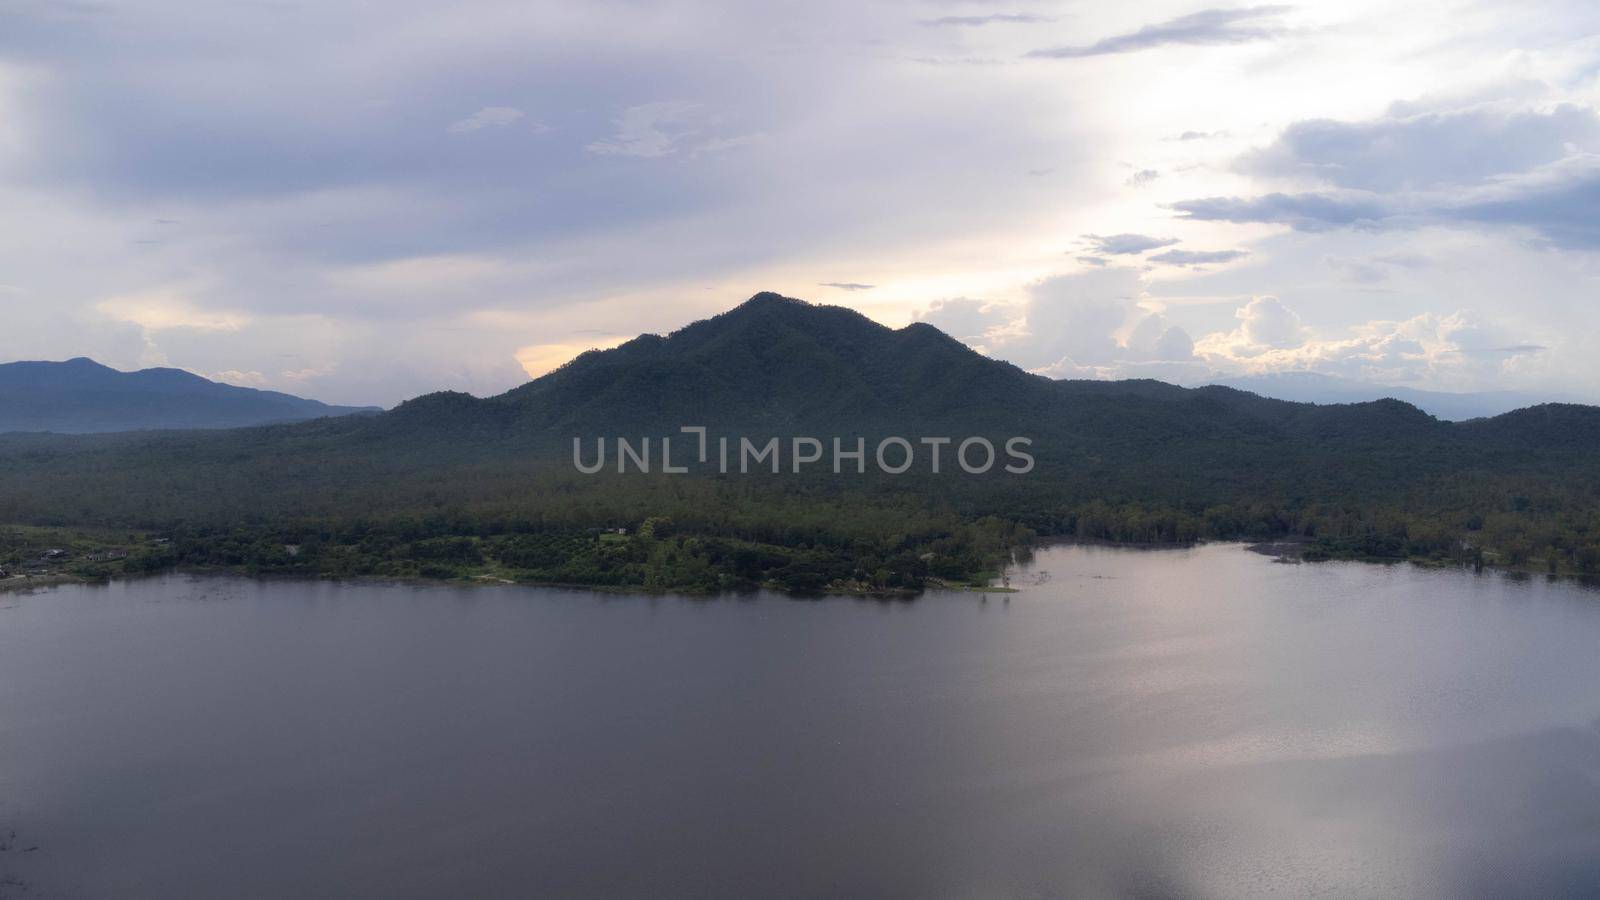 Aerial view of reservoir on tropical mountain background at sunset in northern Thailand. Beautiful landscape nature background.